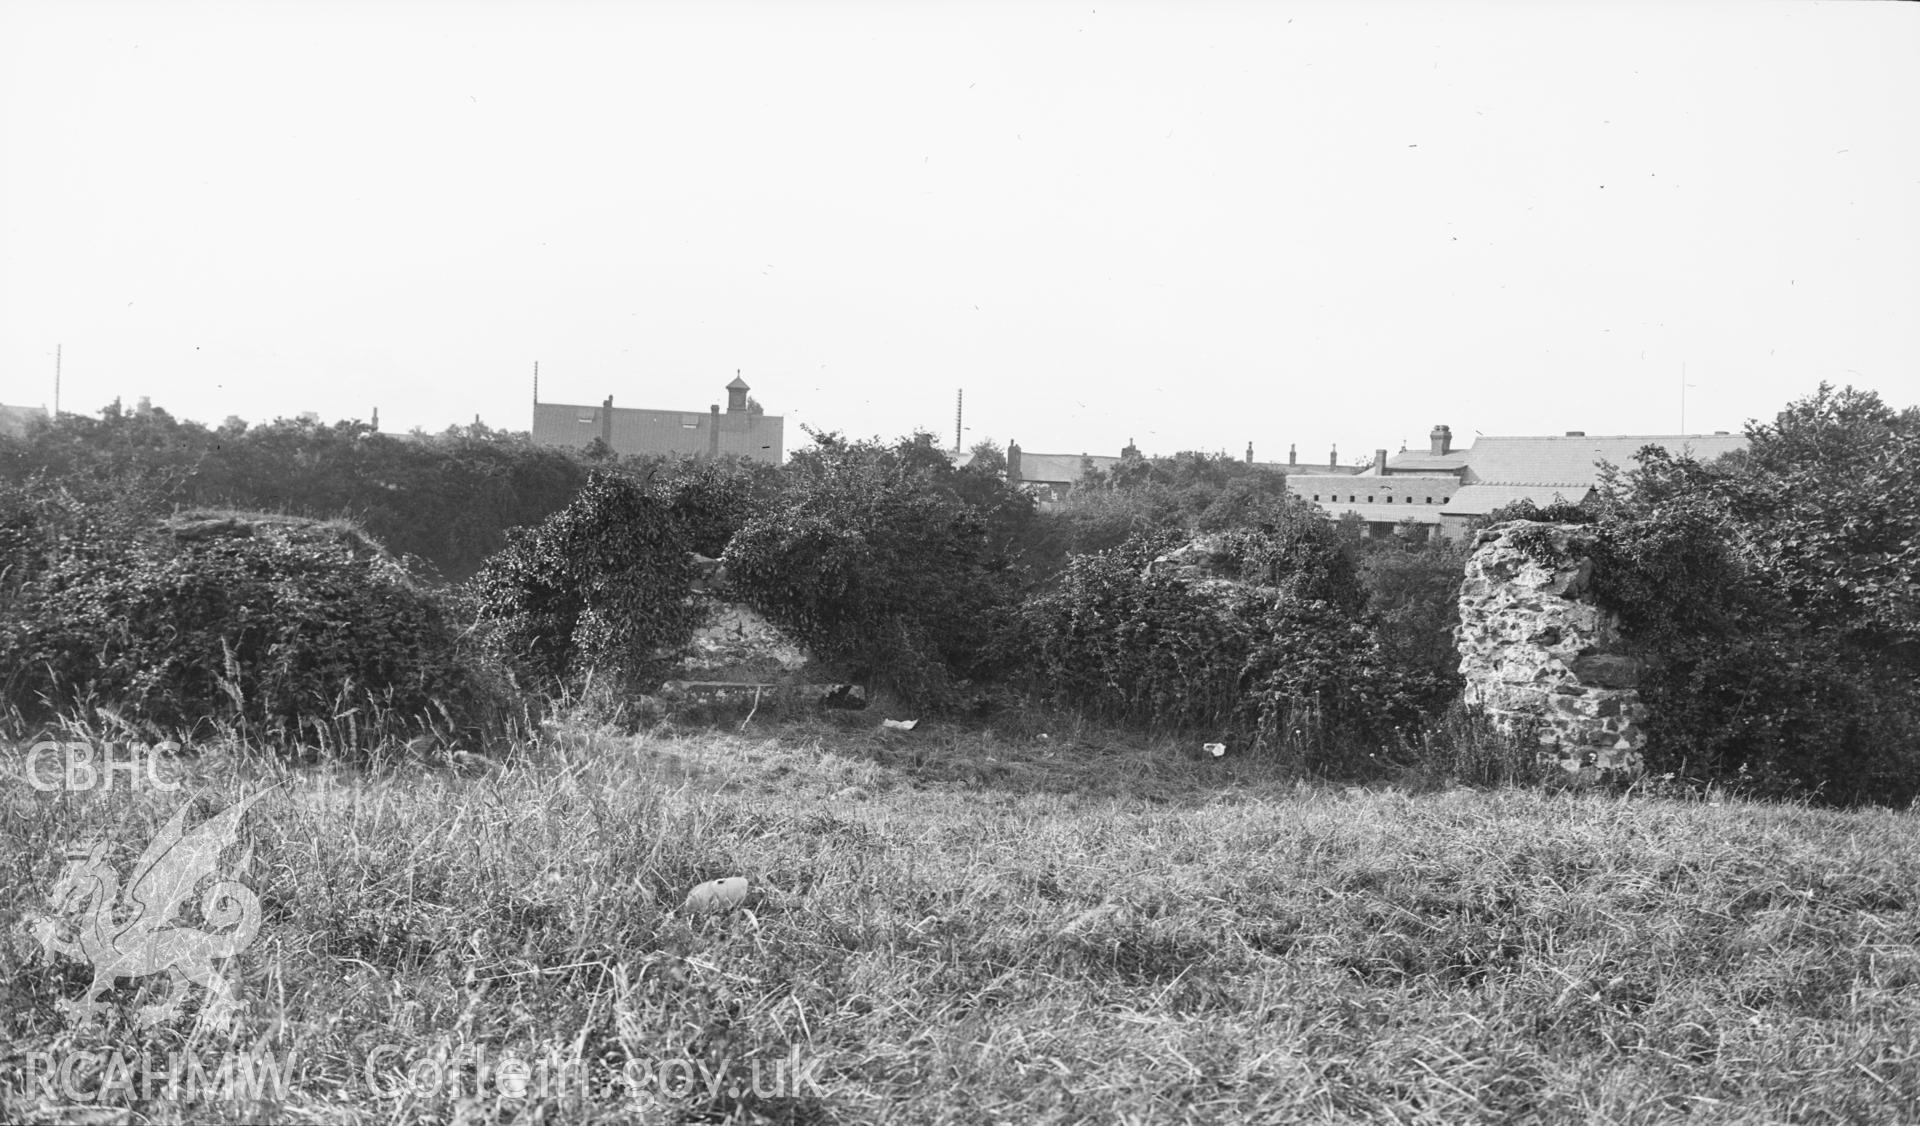 Digital copy of a nitrate negative showing Holt Castle taken by RCAHMW, undated.